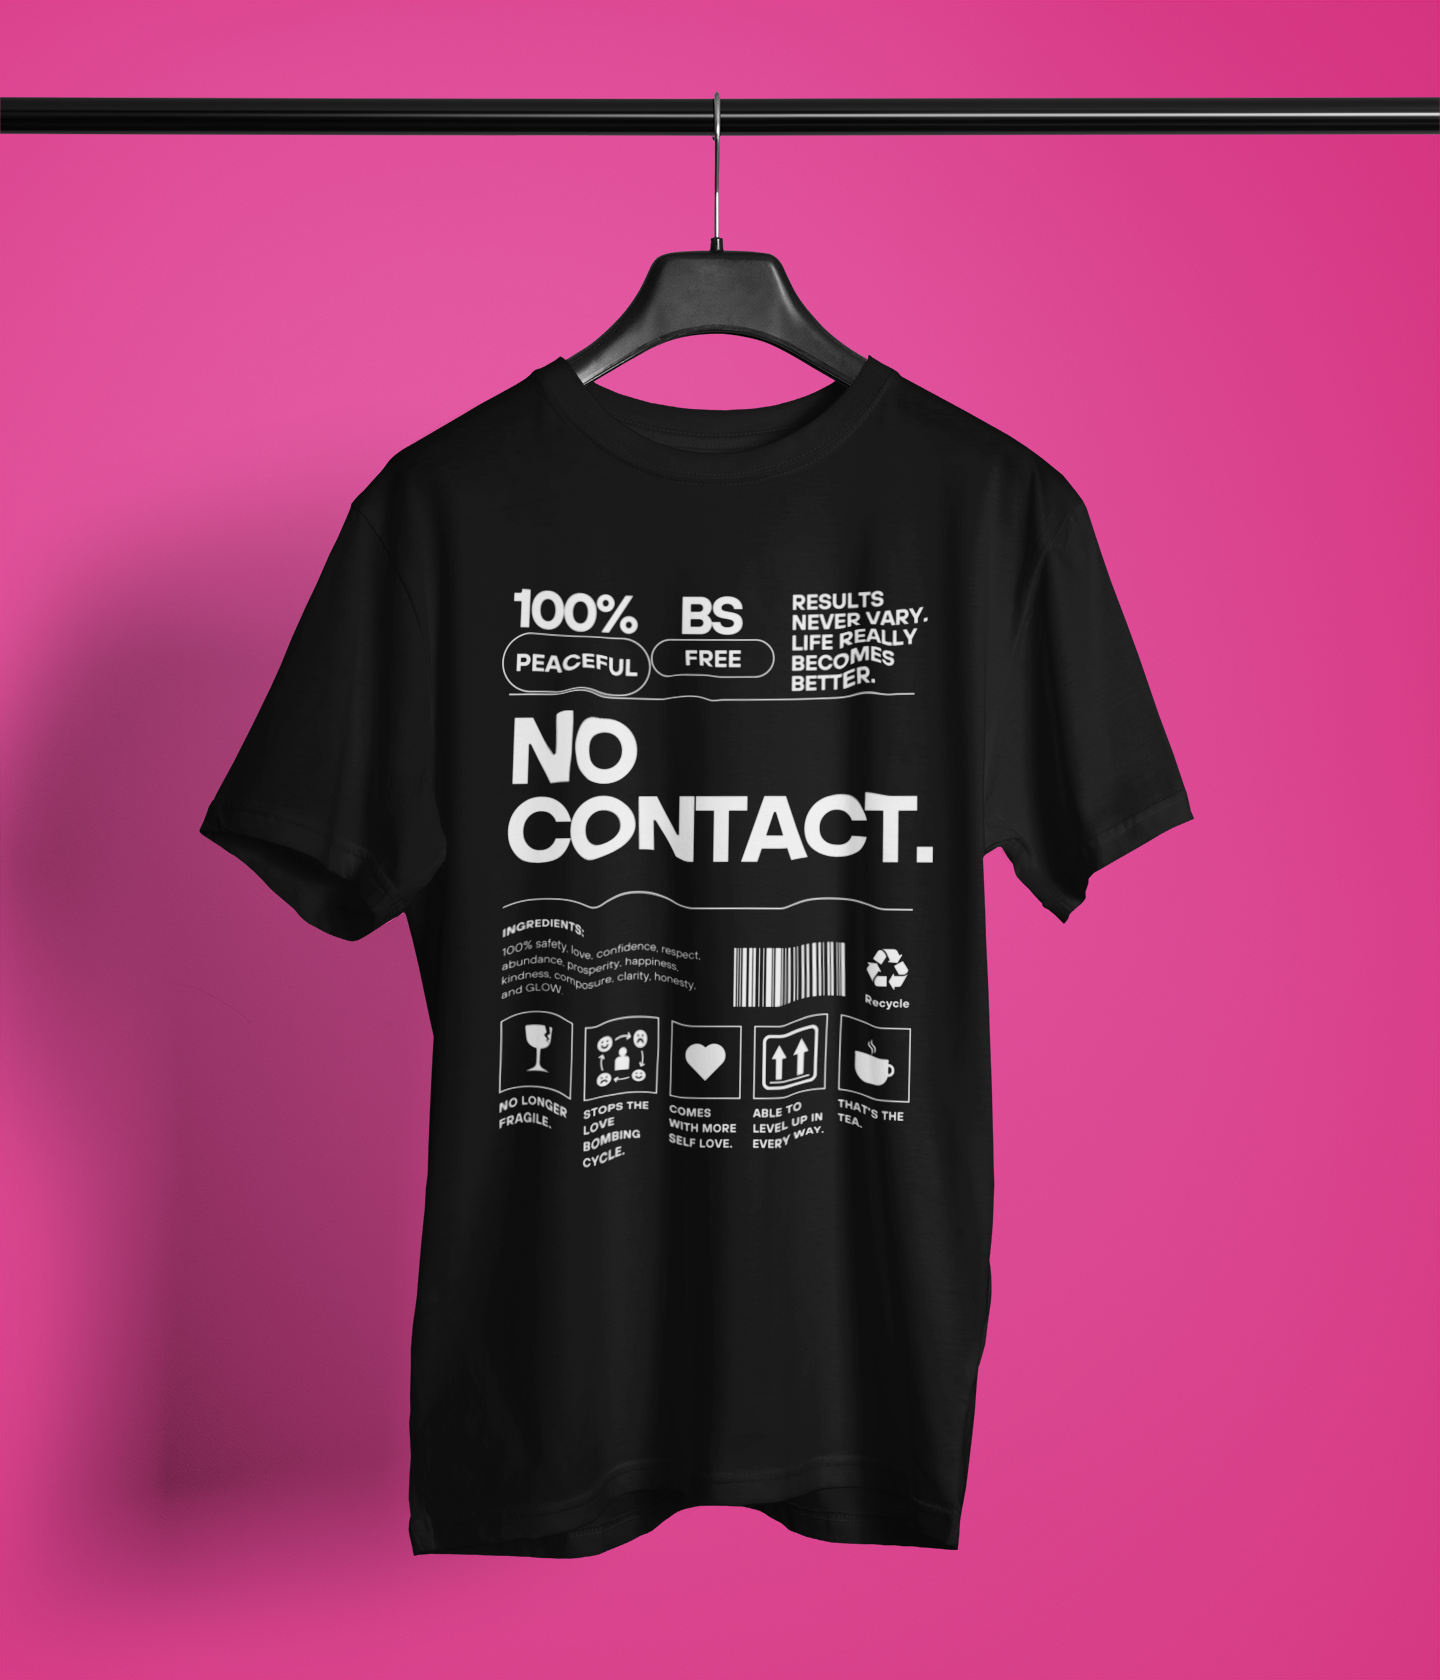 The No Contact Tee